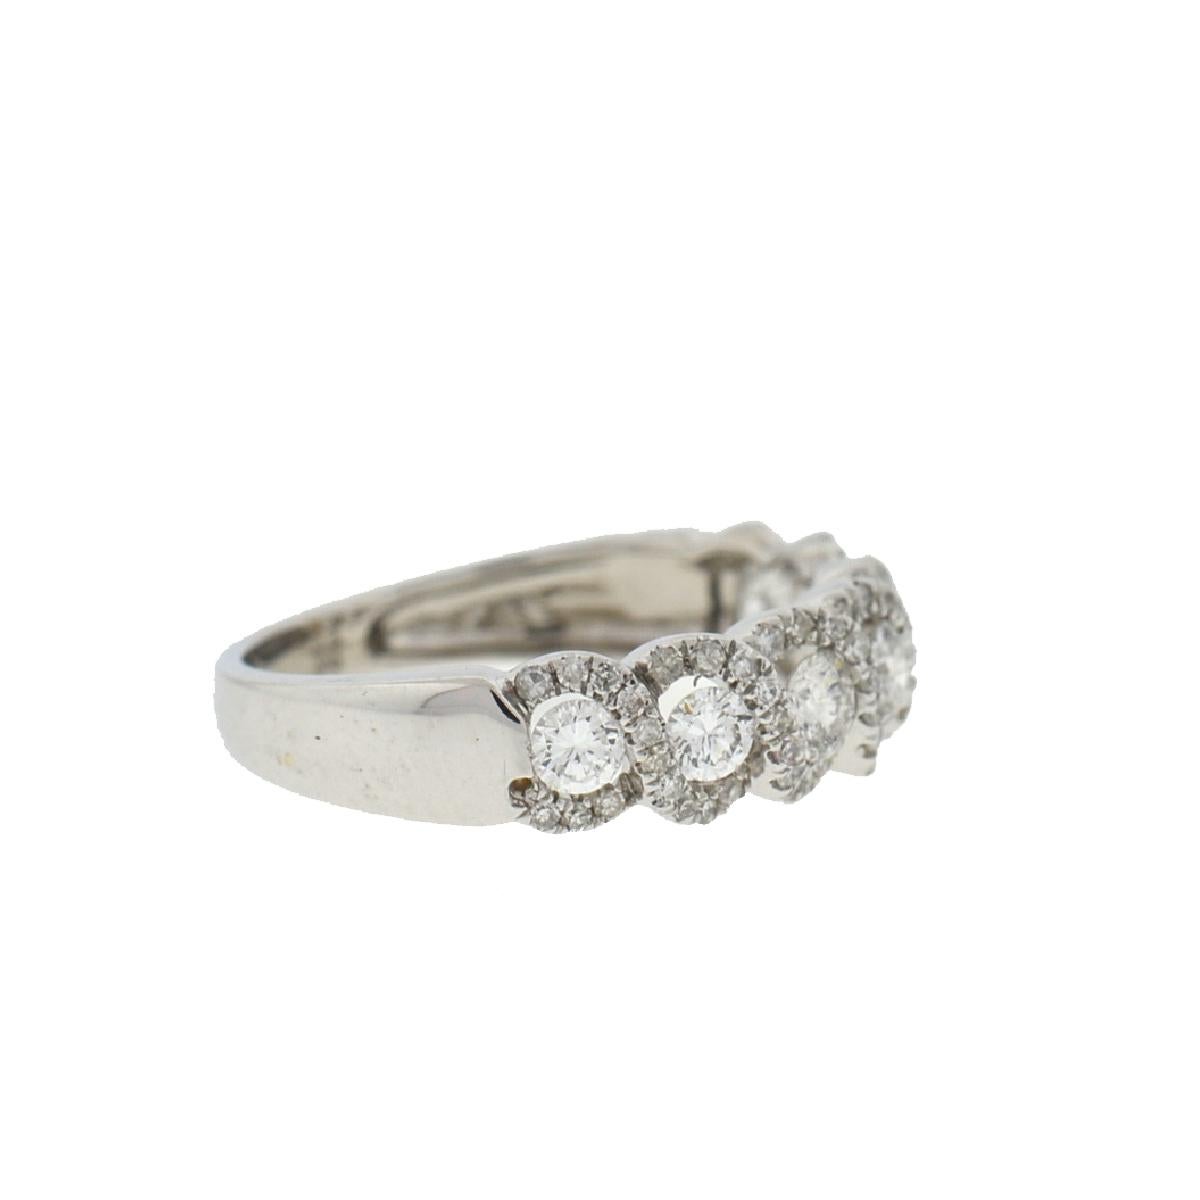 Company-N/A
Style-Twist Style Diamond Band Ring 1 Ct
Metal-14k White Gold 
Size-6.75
Weight-2.79 grams
Stones-Diamonds approx 1 Cts tw
SKU-8990-1OEE